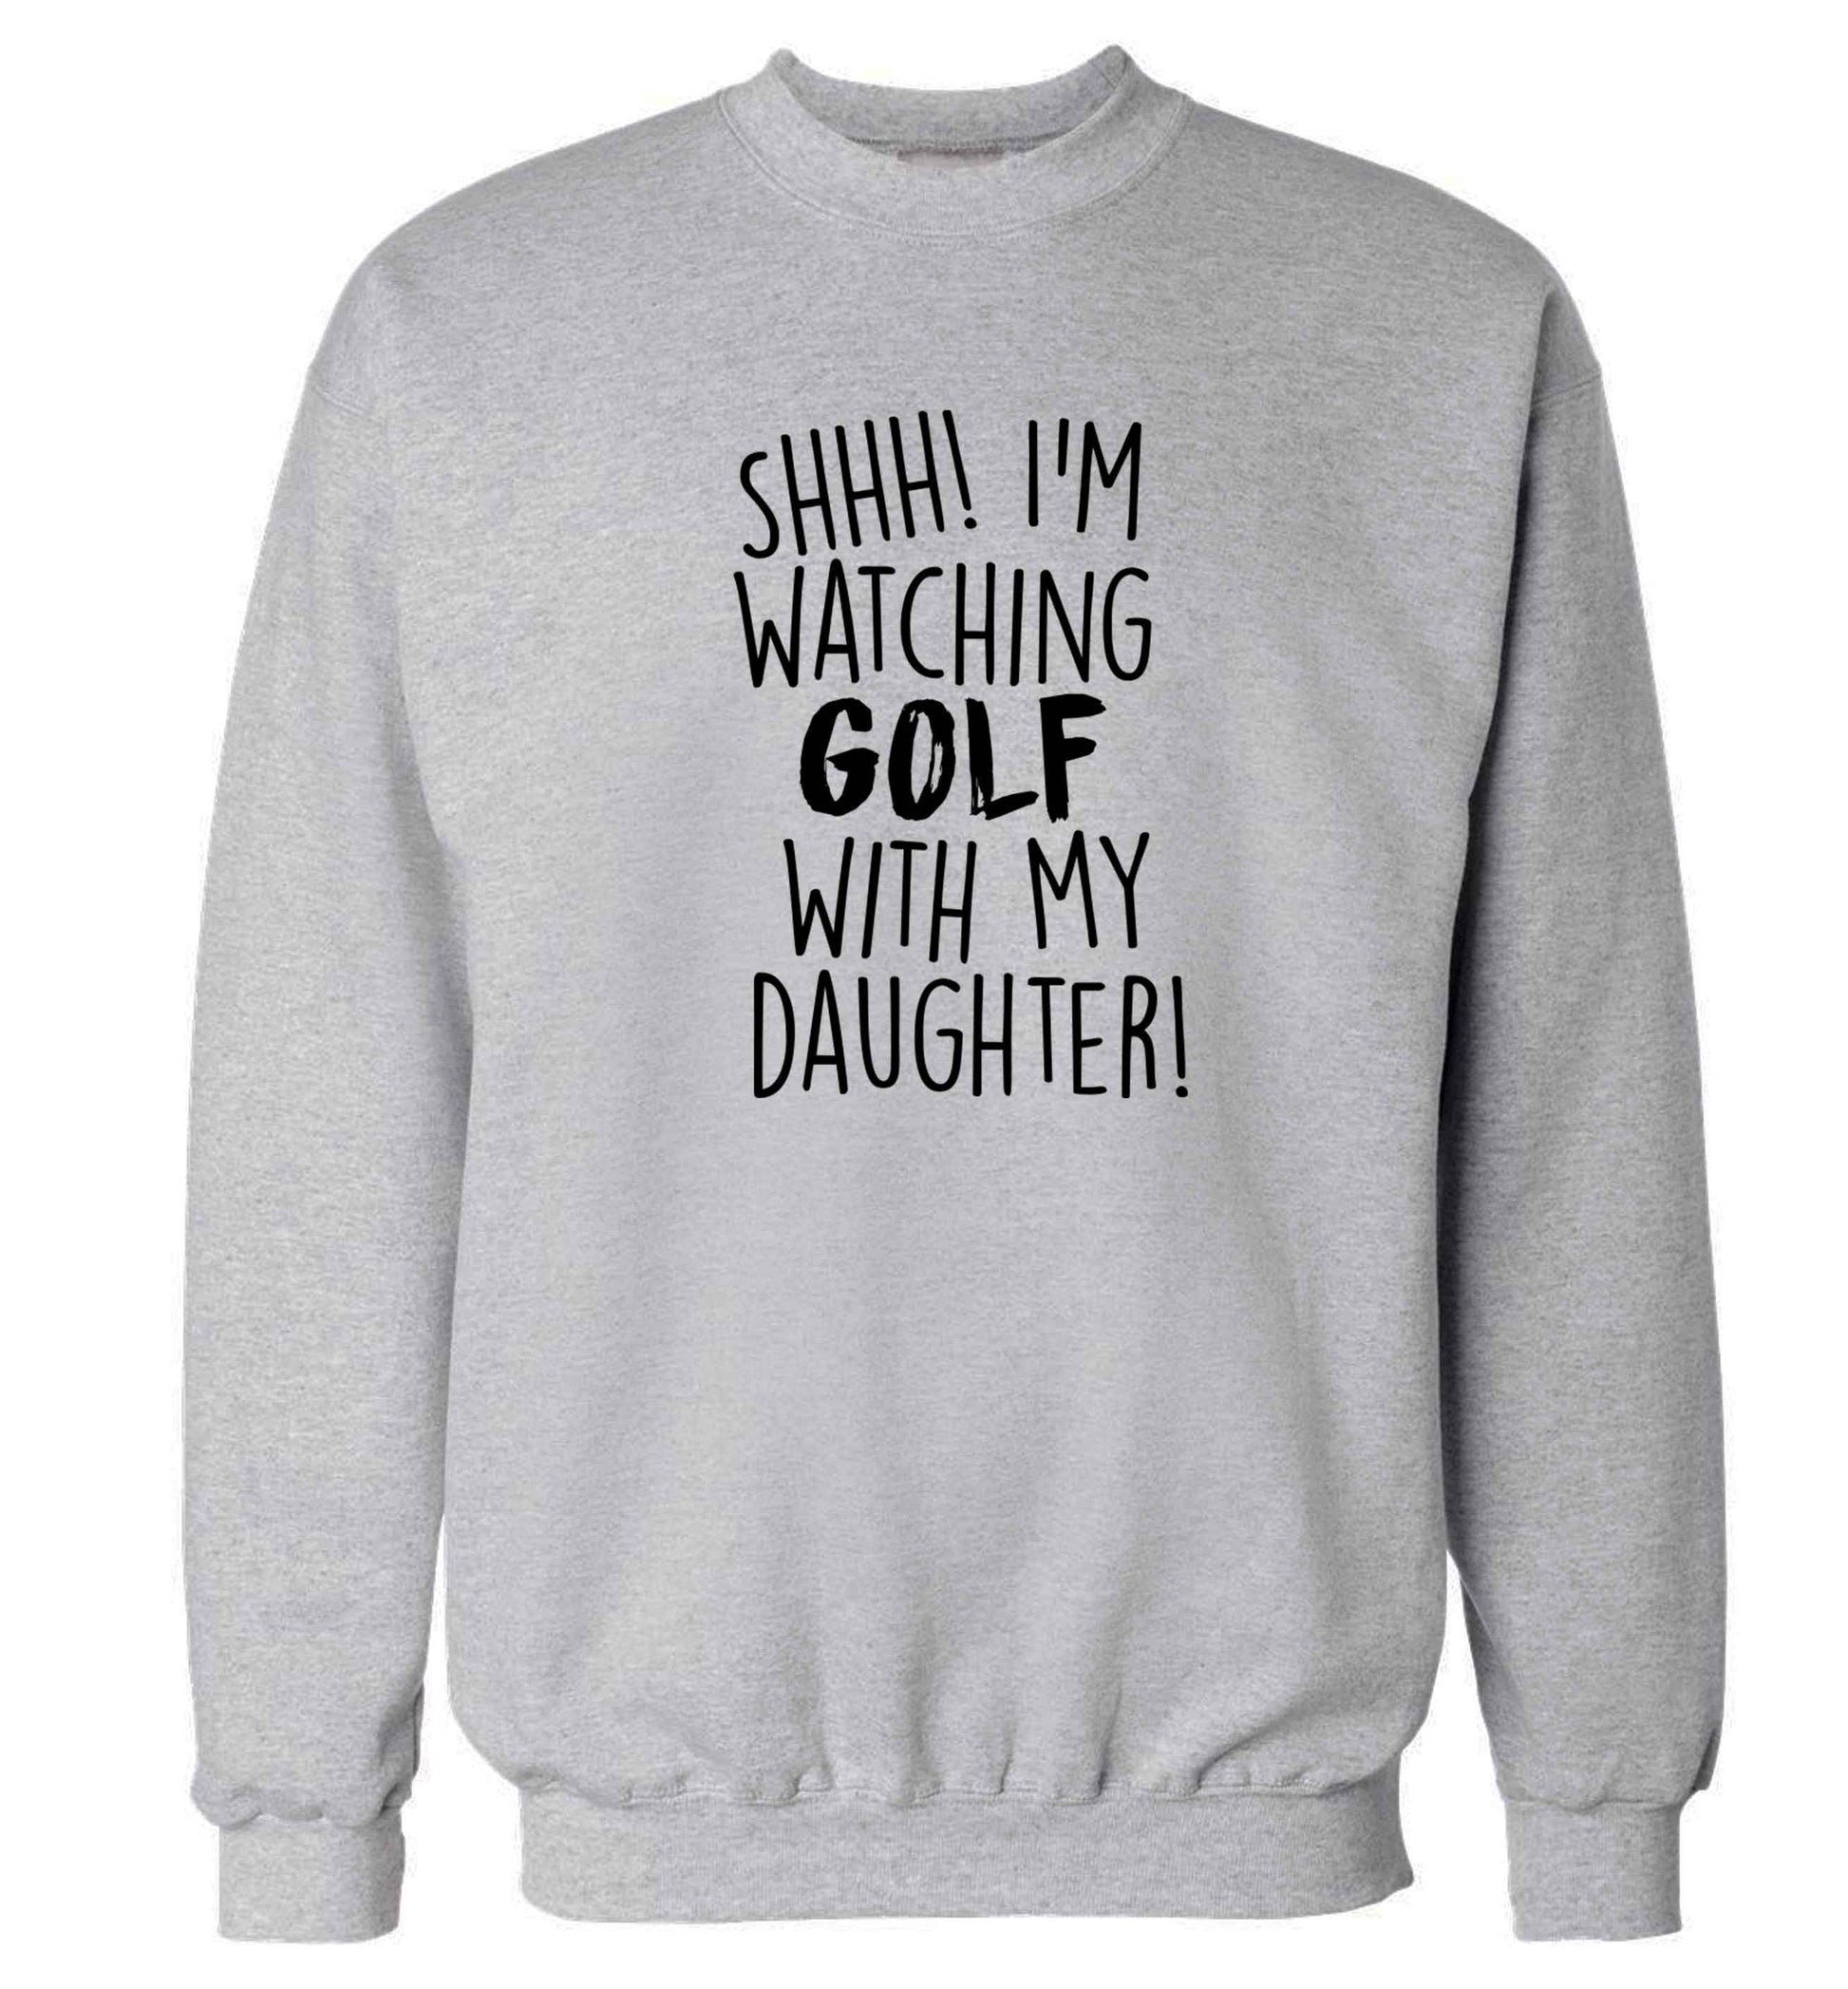 Shh I'm watching golf with my daughter Adult's unisex grey Sweater 2XL